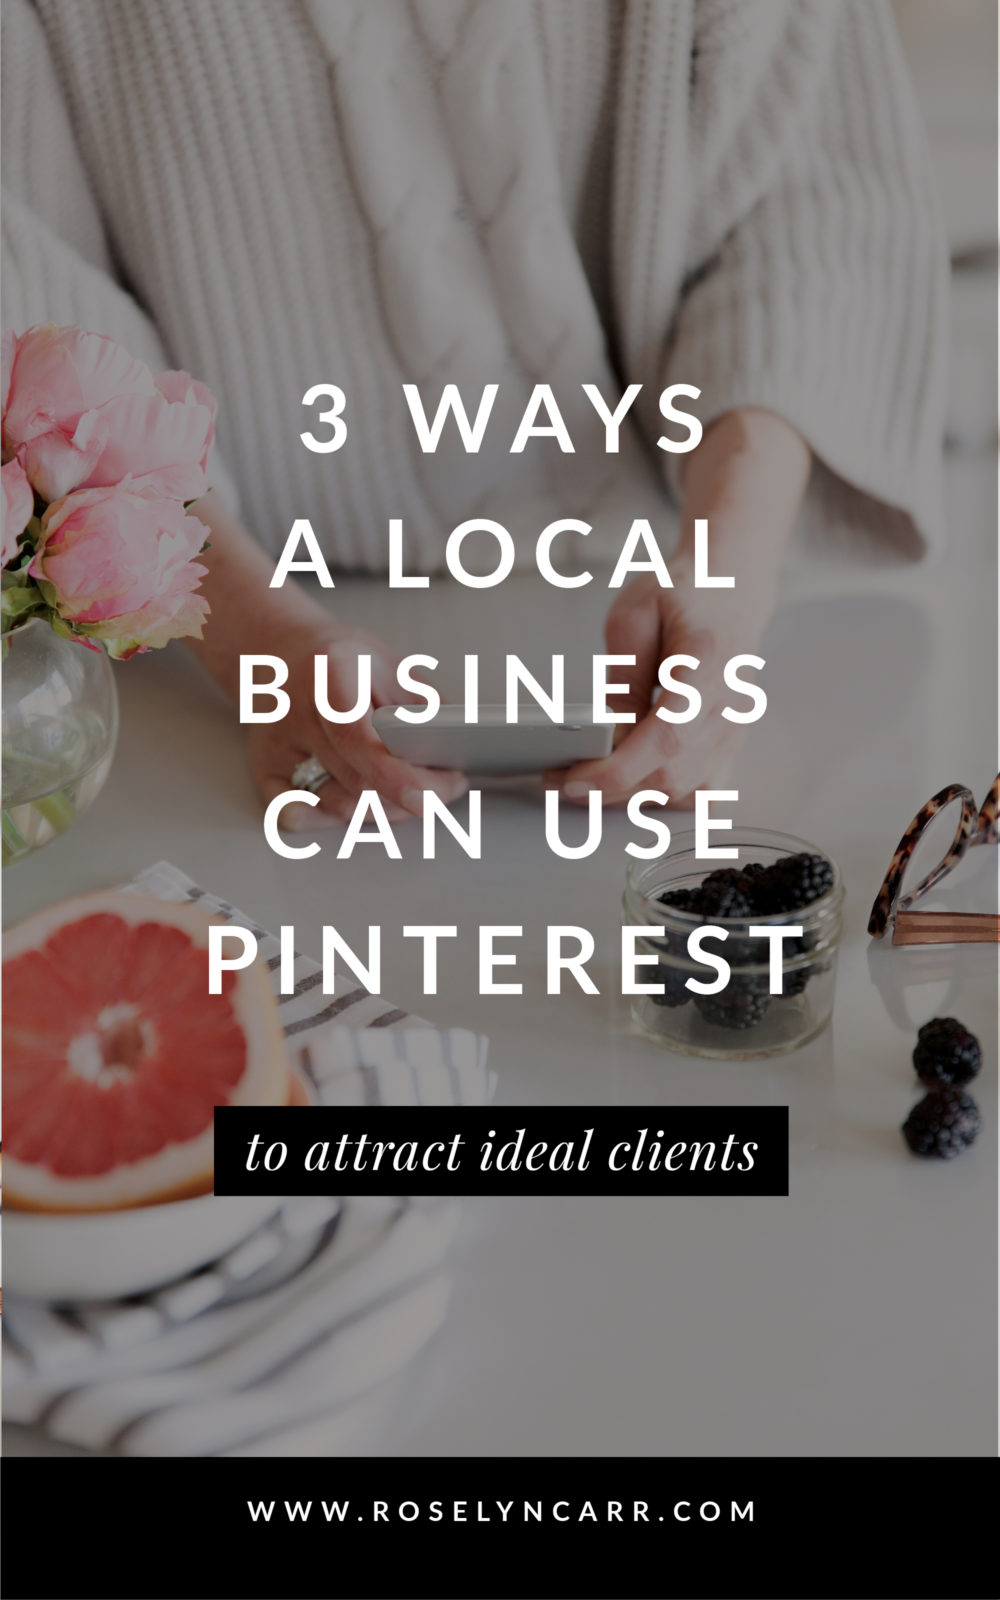 Pinterest for local artists and creatives - 3 ways to attact your ideal clients